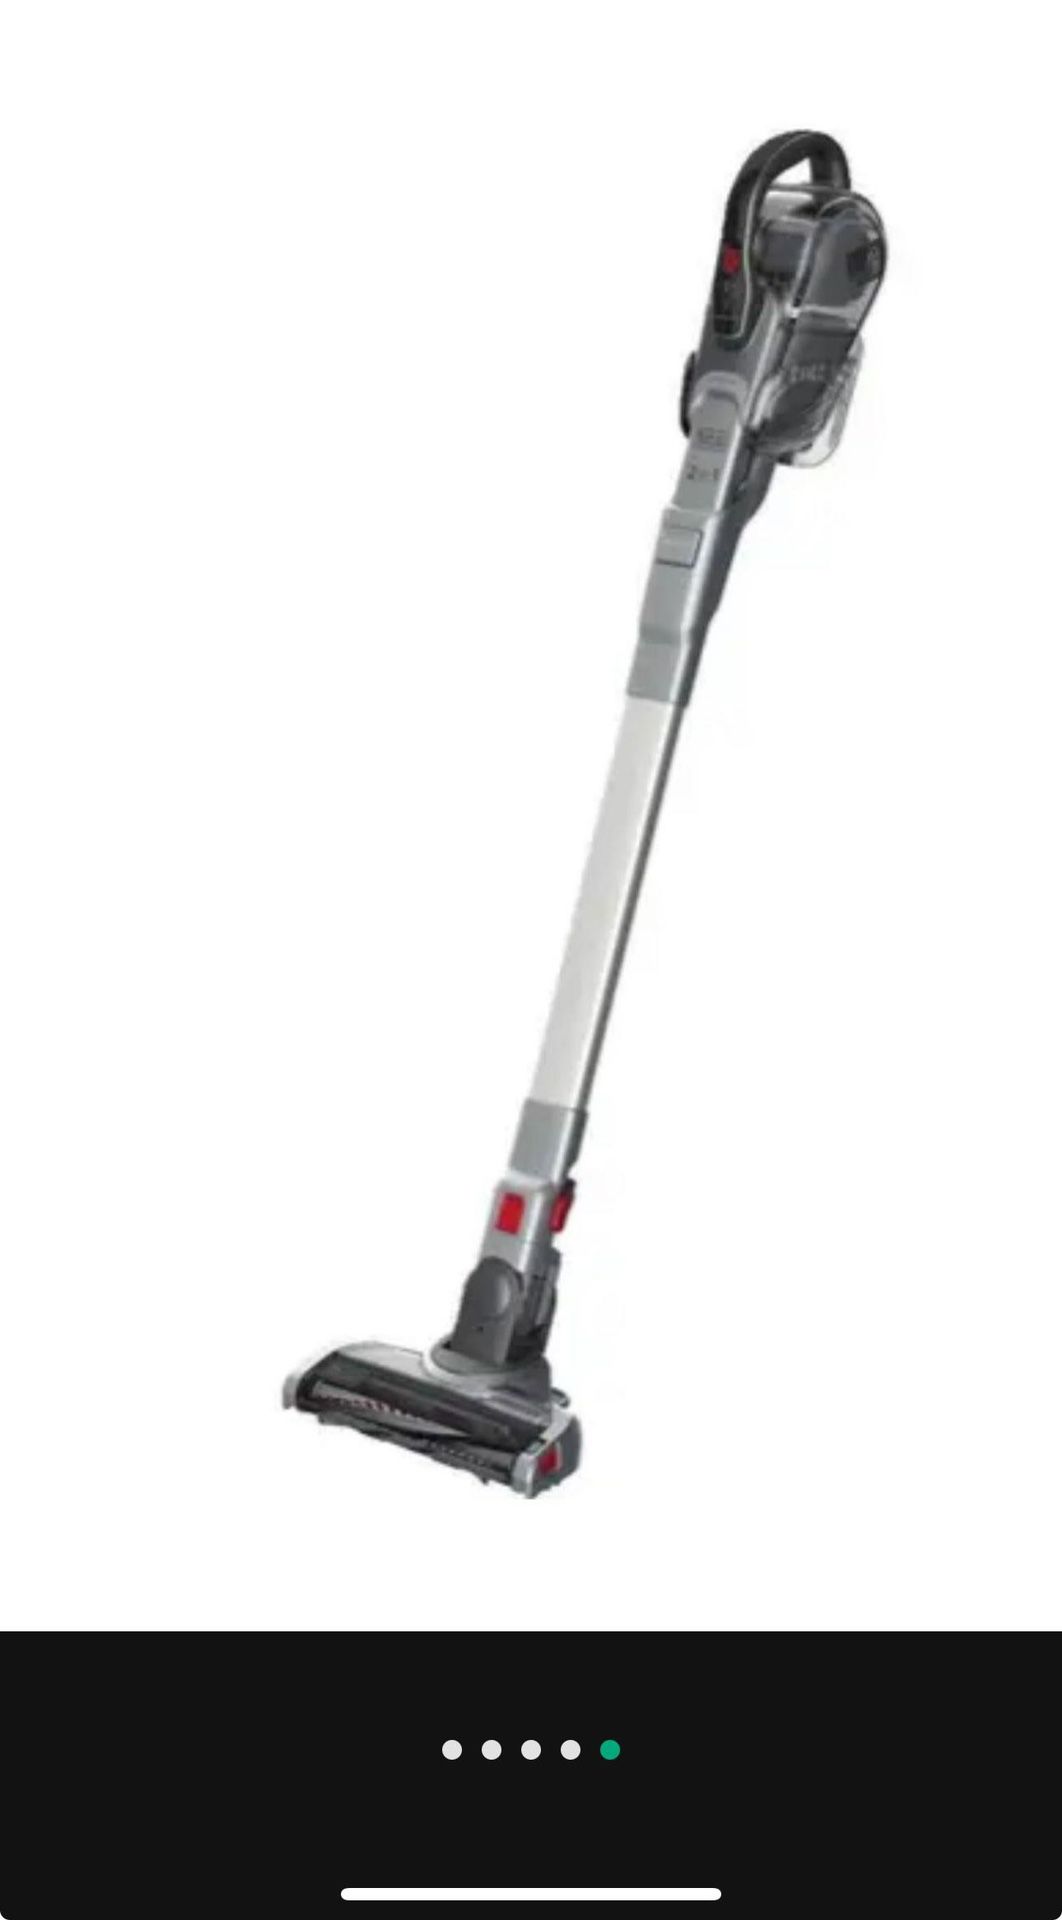 Black+Decker PowerSeries 2-in-1 Cordless Stick Vacuum Rechargeable Lithium Ion